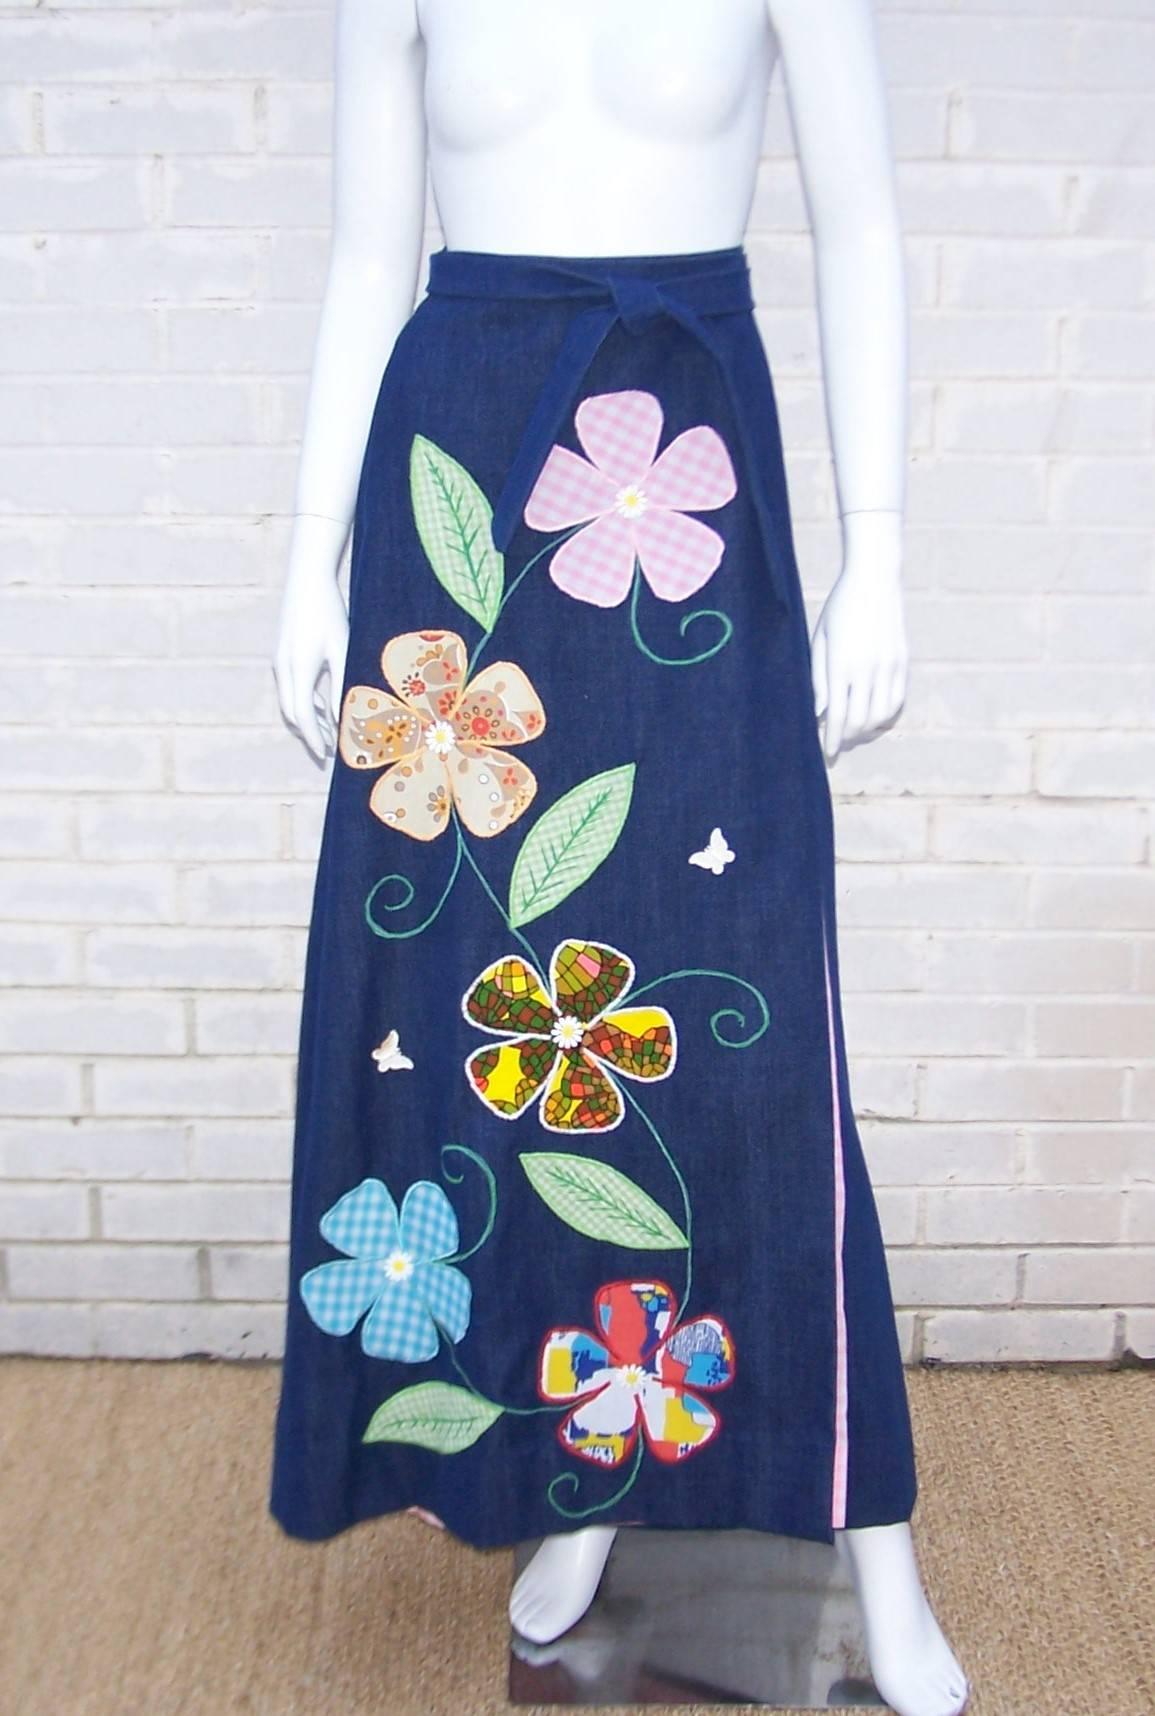 This C.1970 maxi wrap skirt is adorable.  The soft finish denim is embellished with floral appliques and stitching which adds color and texture to the design.  It is fully lined with a coordinating pink and white gingham which is cleverly repeated